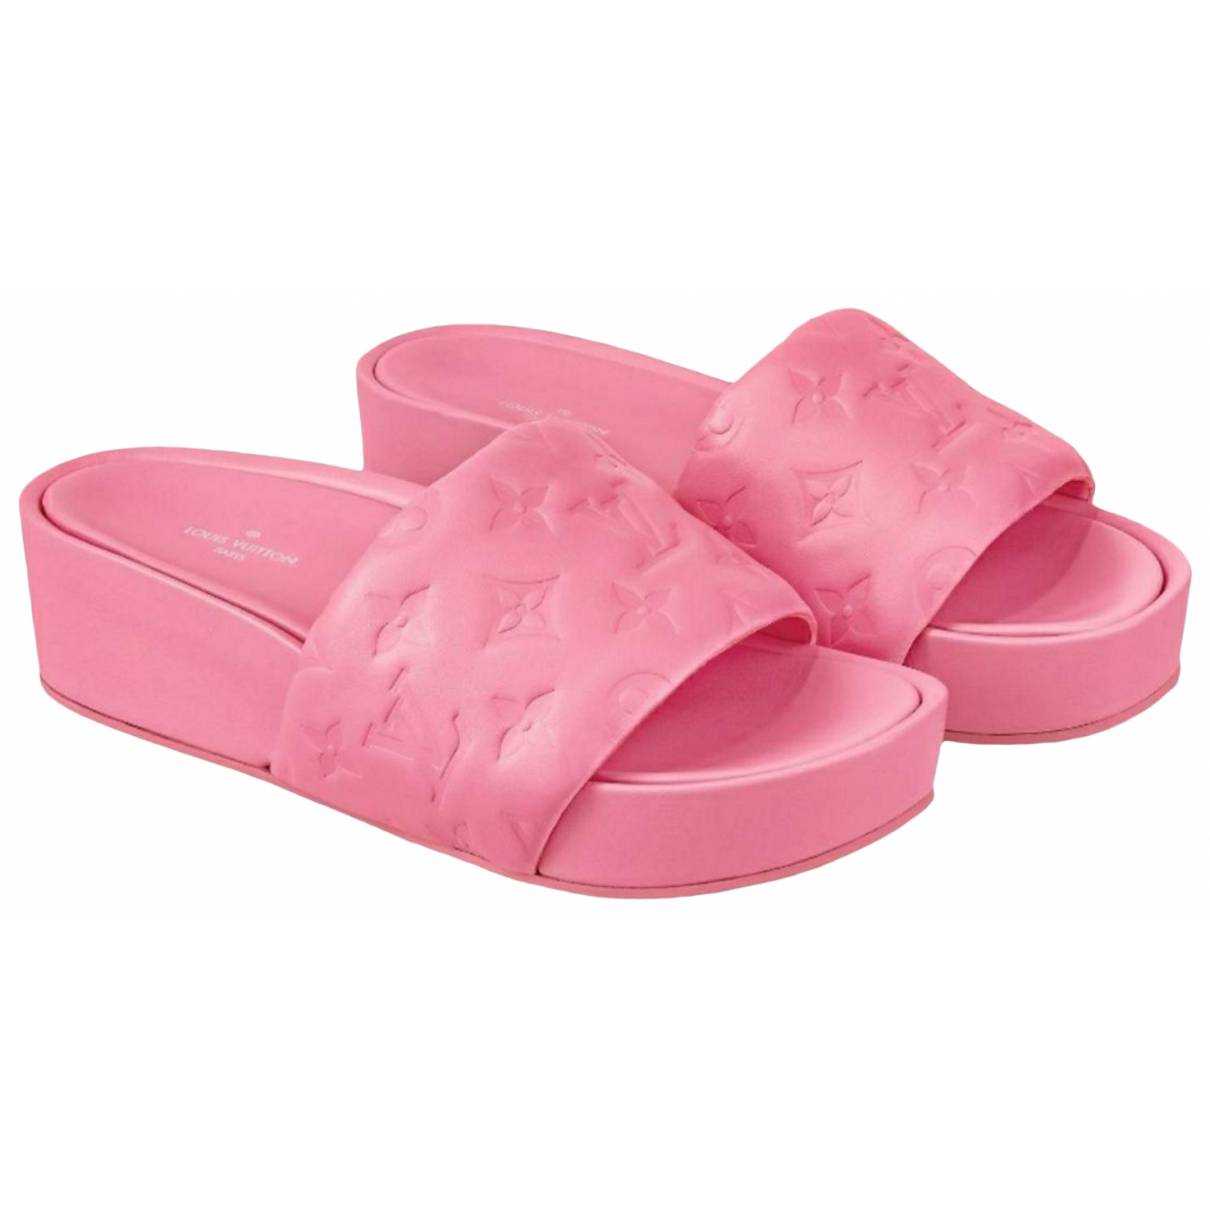 Leather sandals Louis Vuitton Pink size 10 US in Leather - 26168095